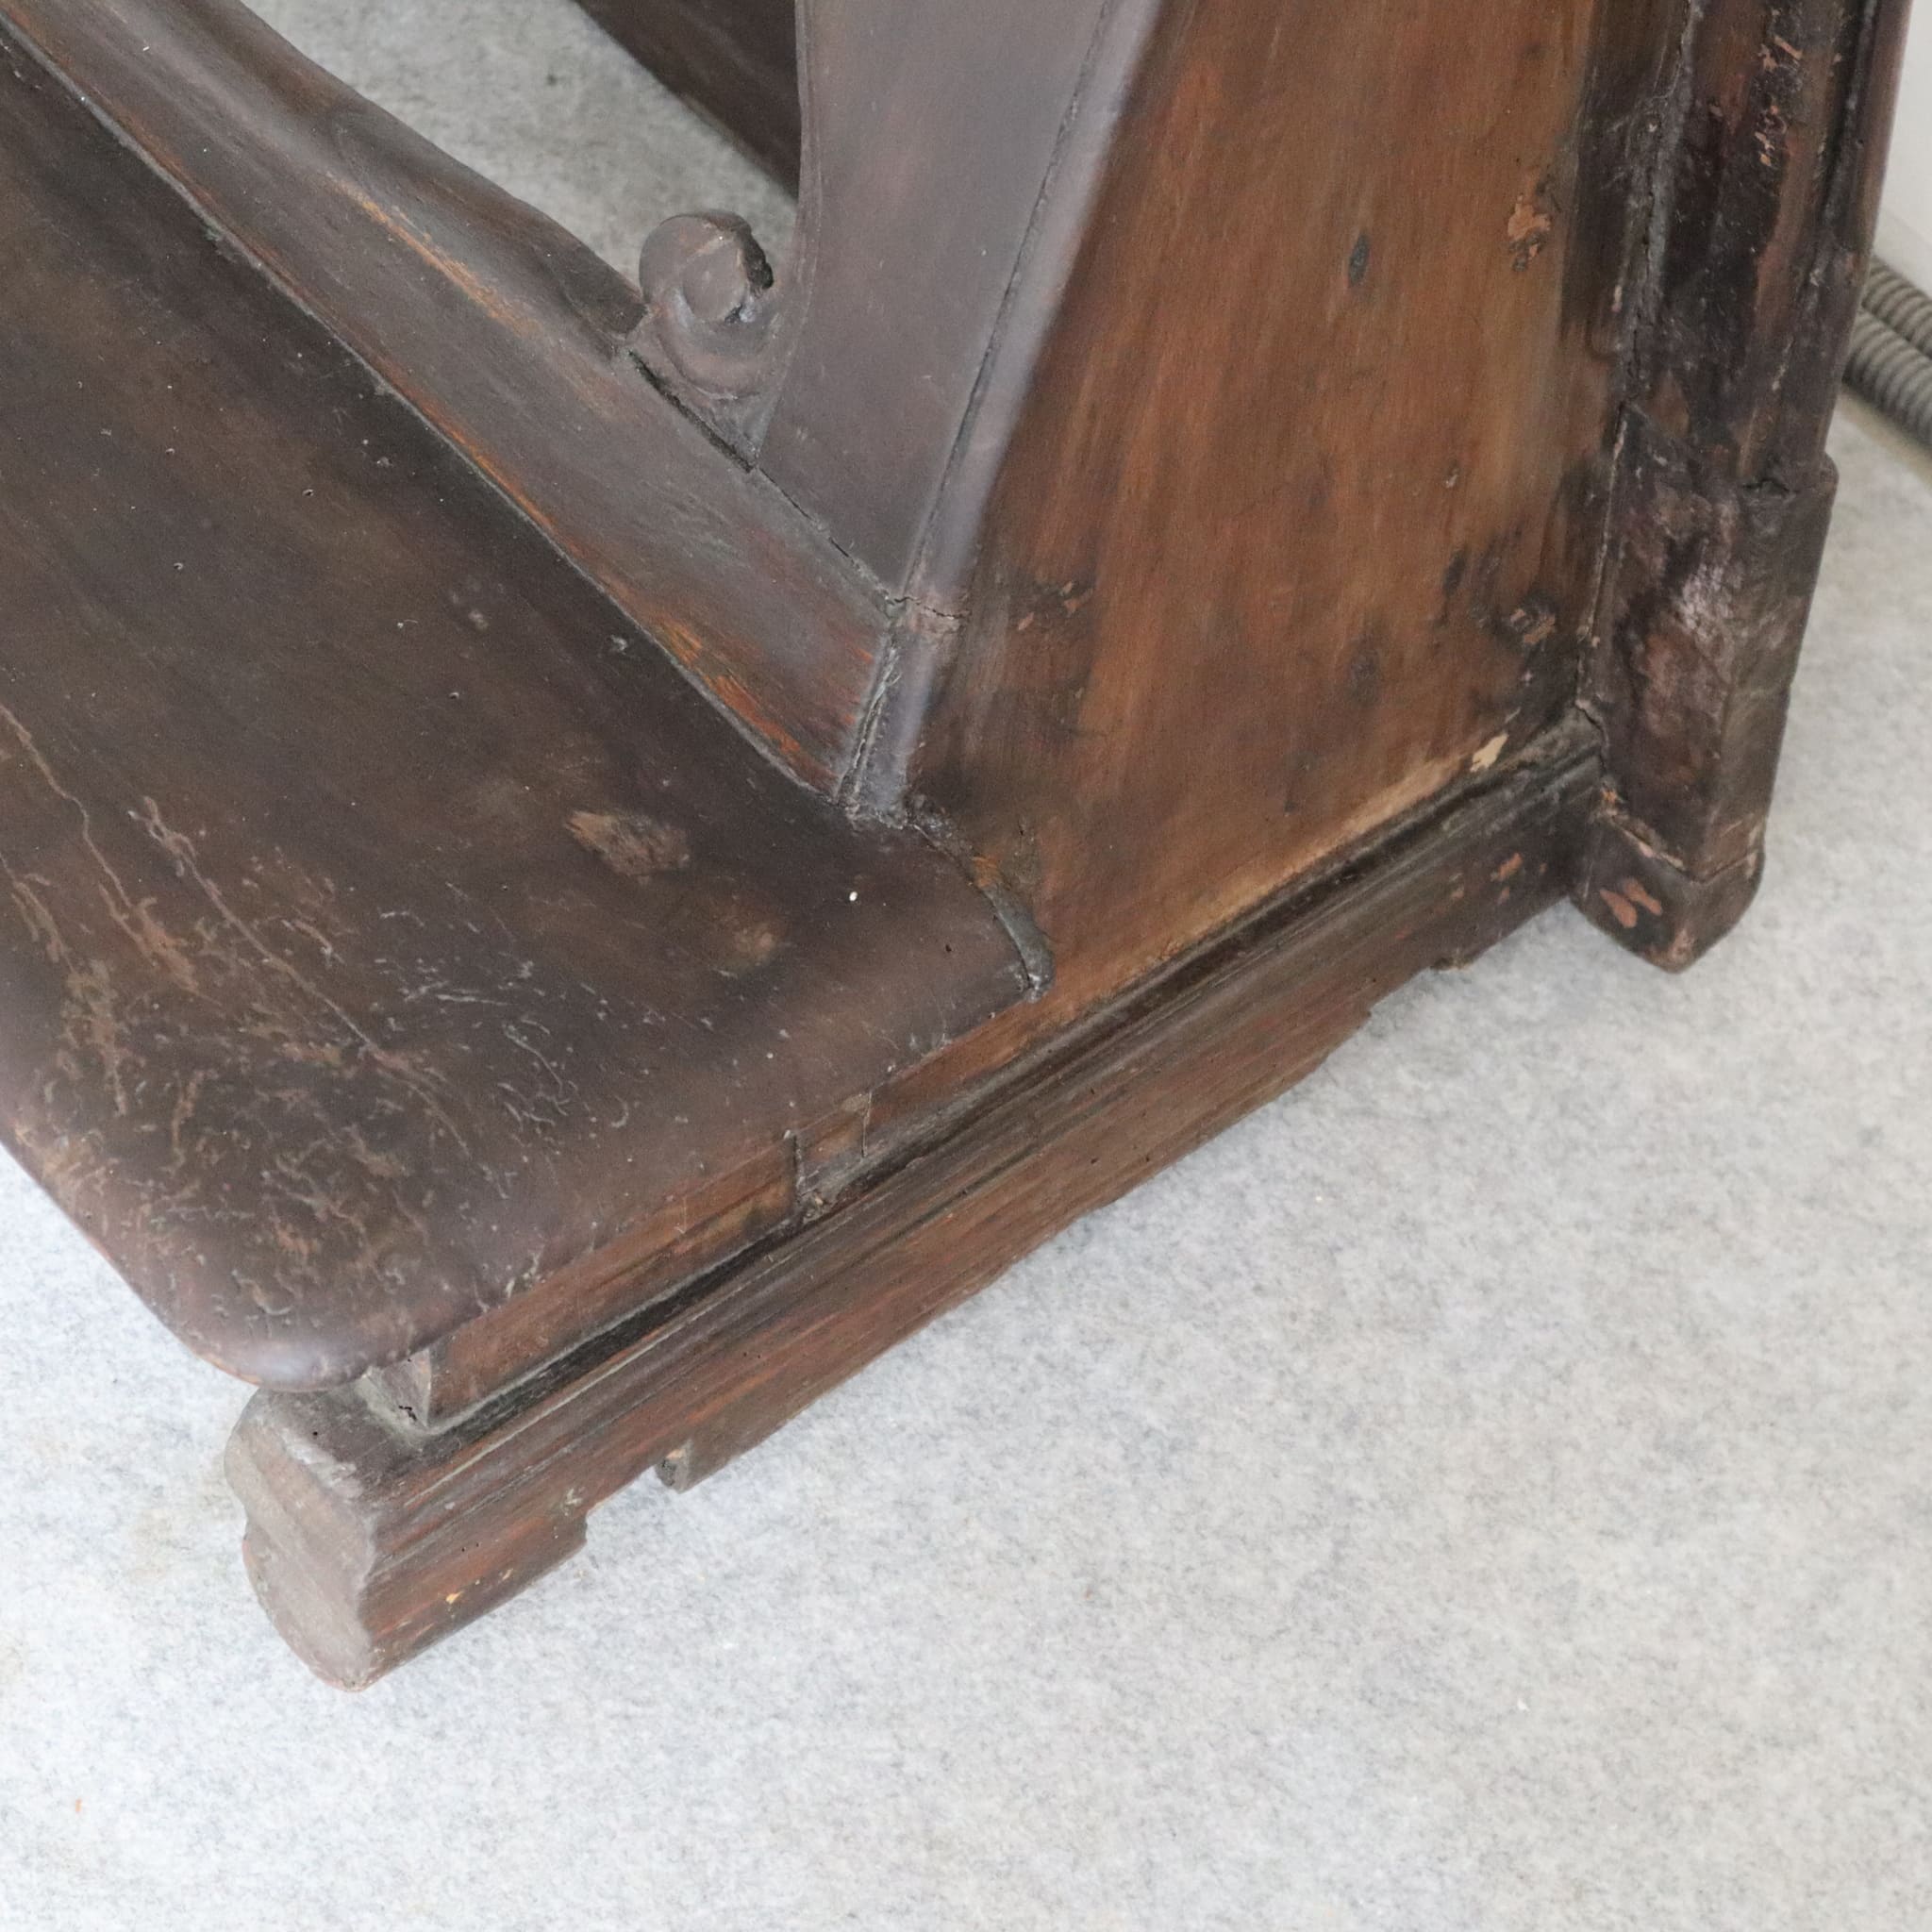 visionidepoca-antique-kneeler-in-solid-walnut-from-18th-century-that-belonged-to-prince-ambrogio-II-caracciolo-detail-view-wooden-wheels